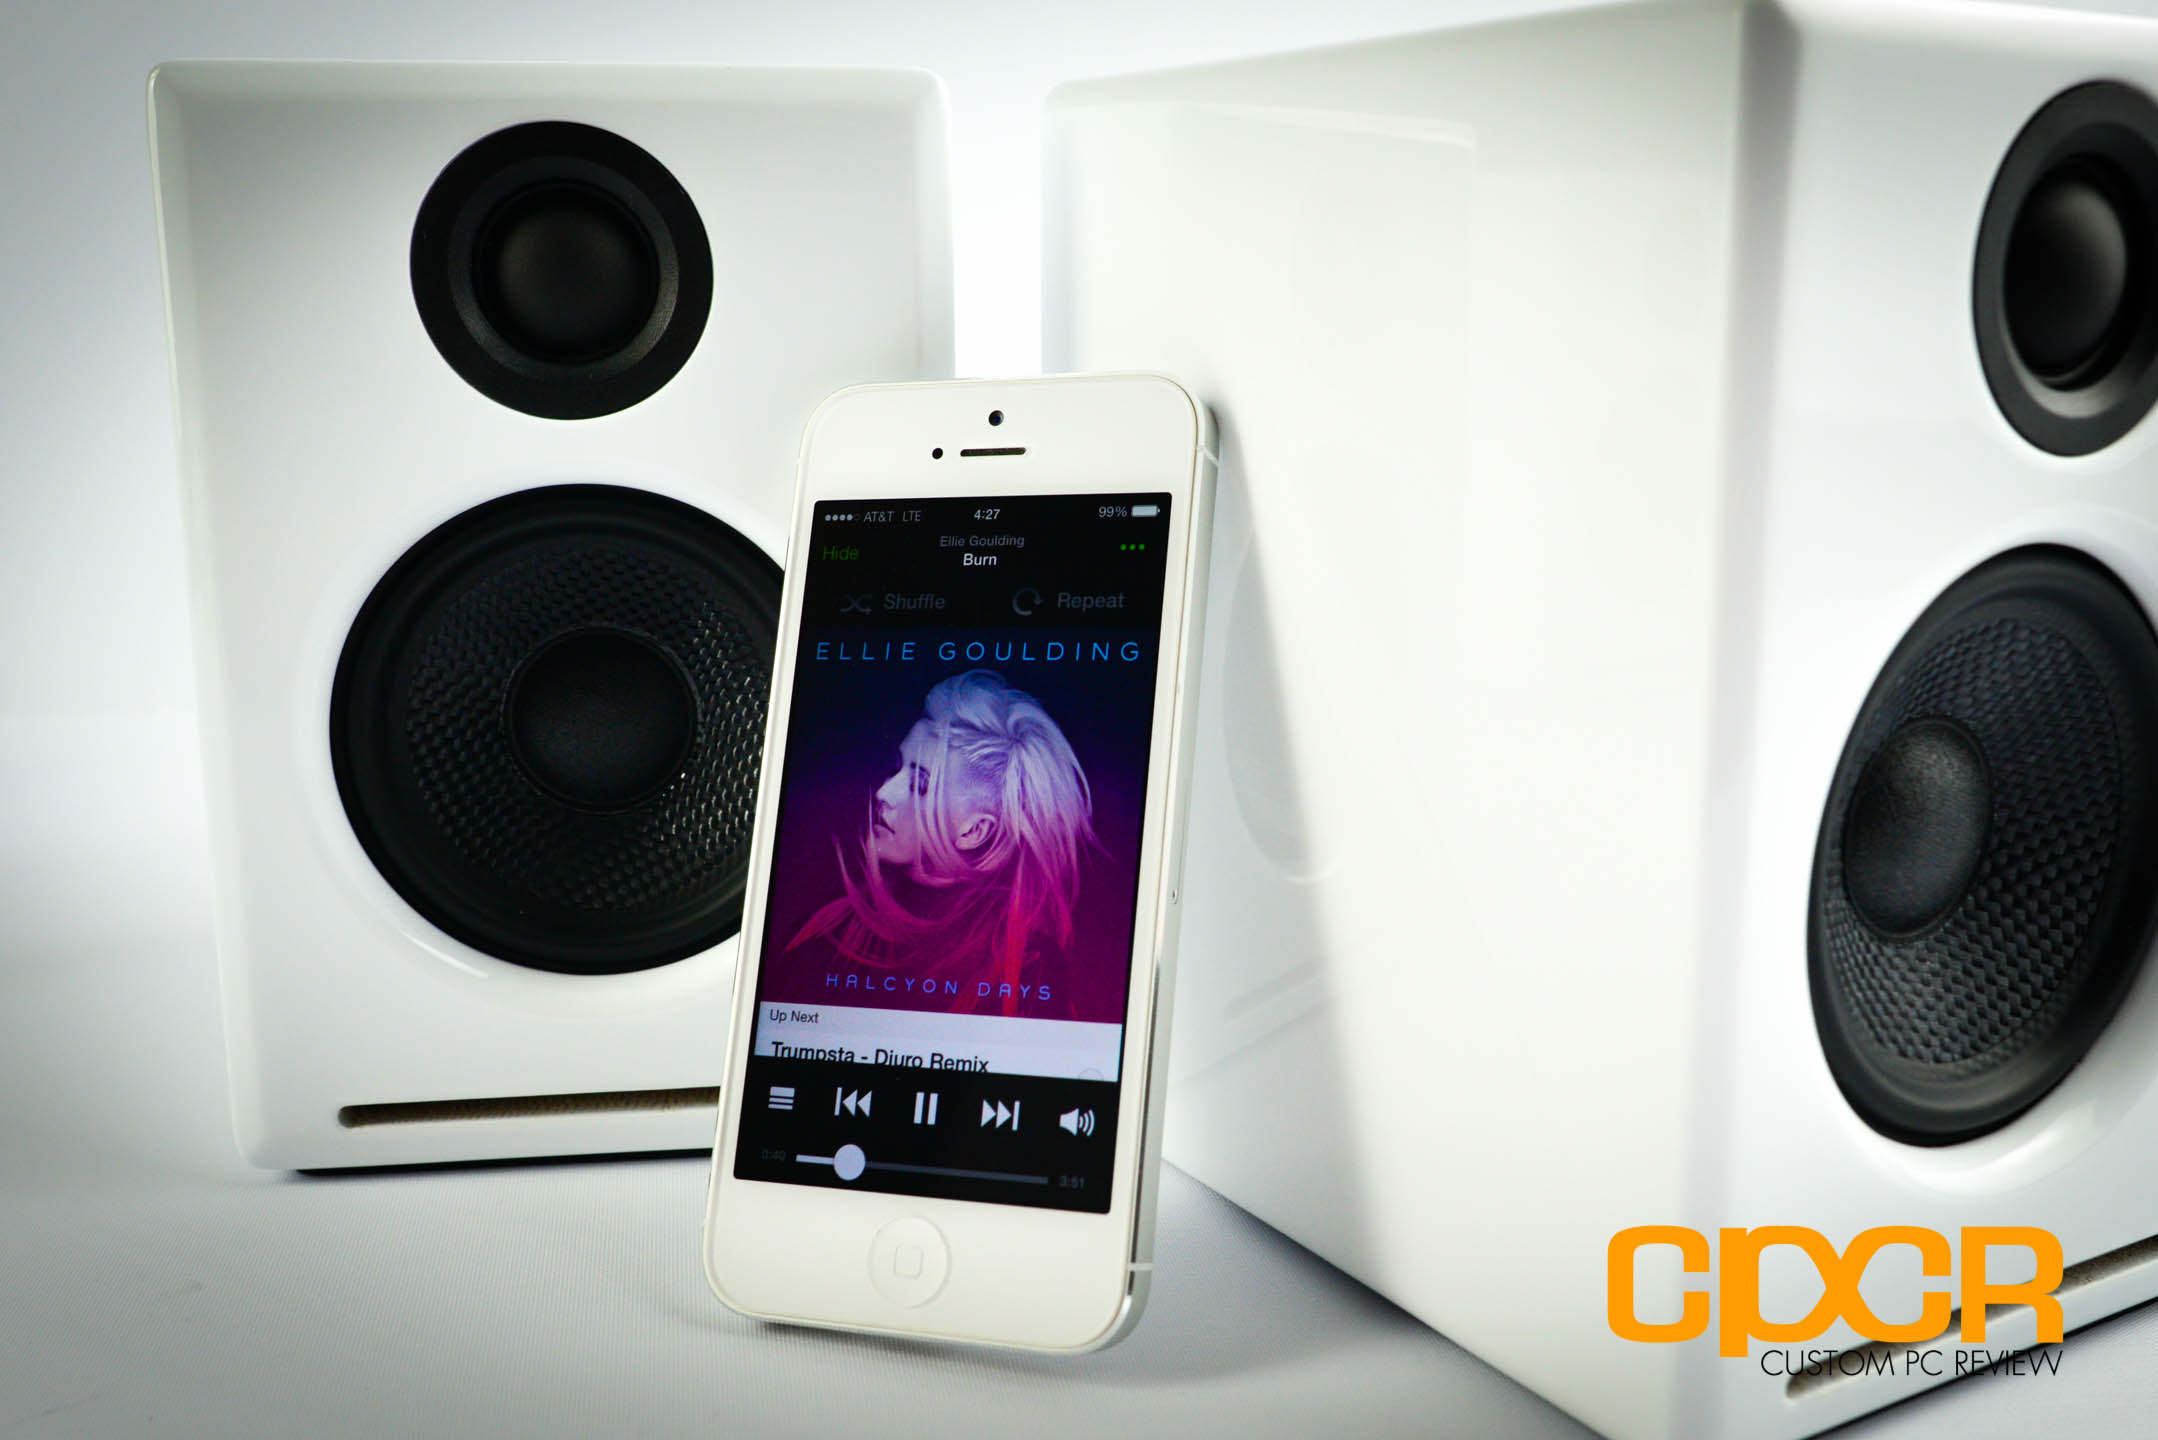 Audioengine A2+ Desktop Speakers and D3 DAC - The Absolute Sound